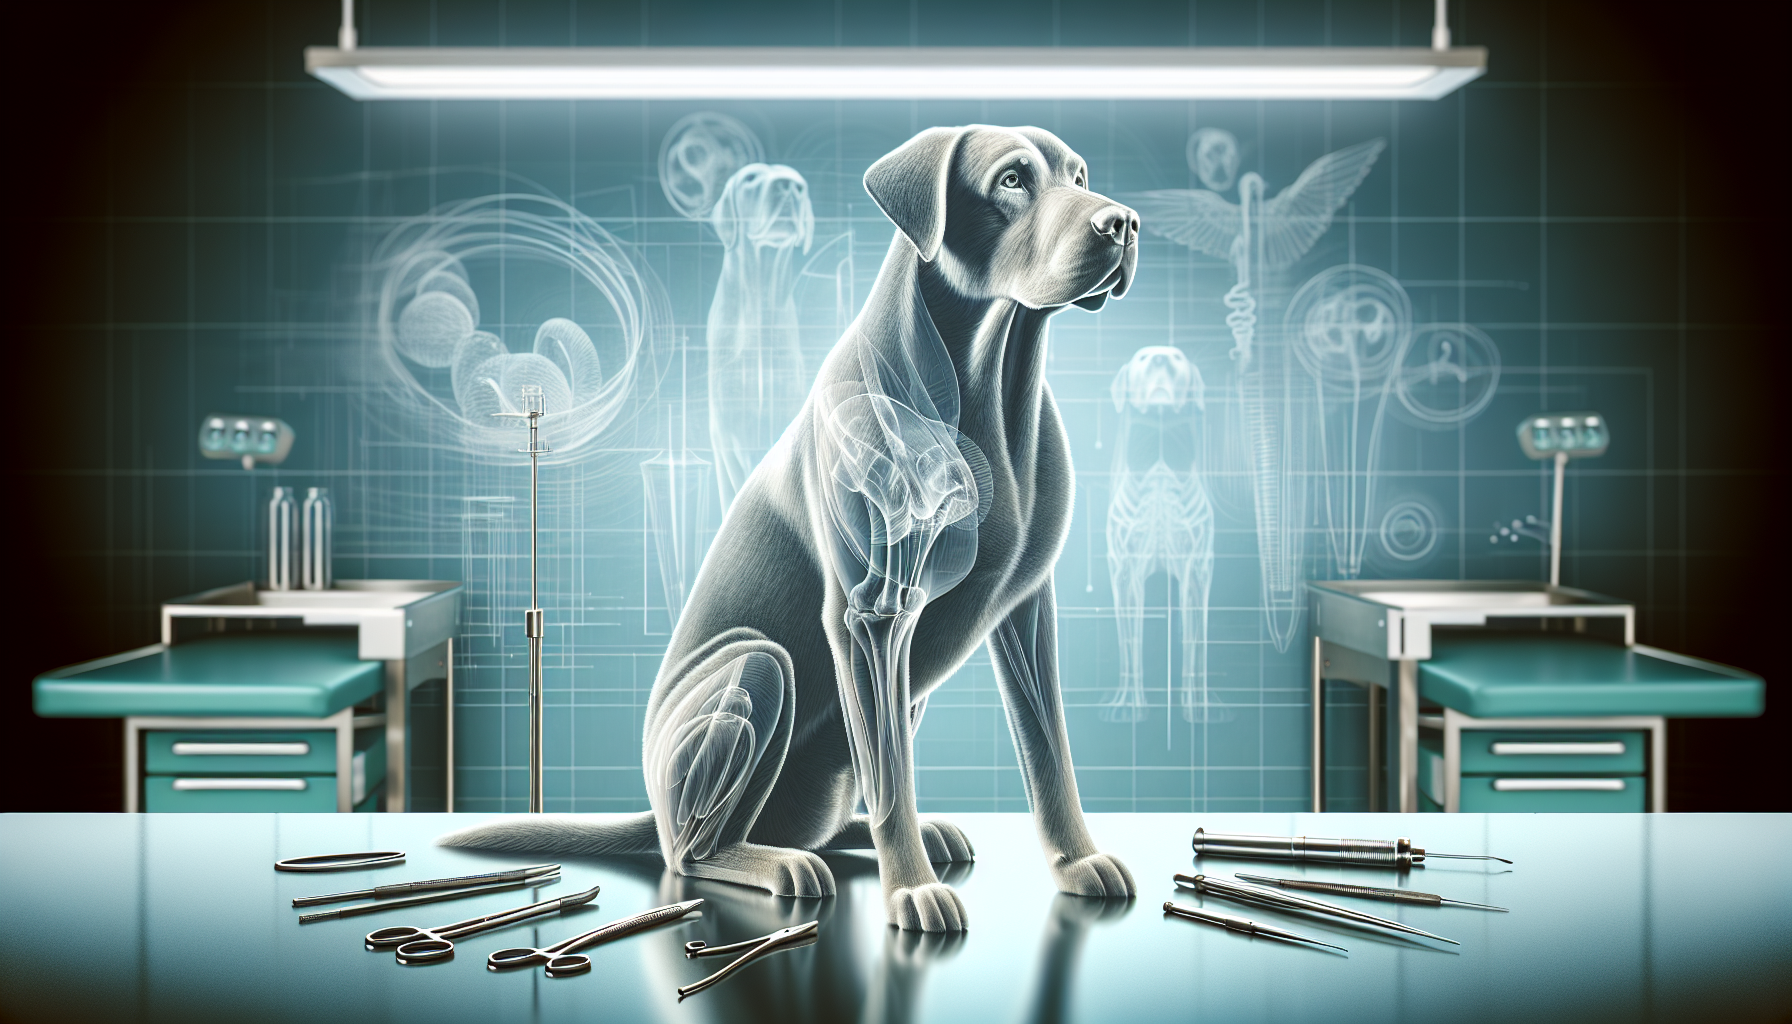 Artistic rendering of a male dog in a veterinary setting